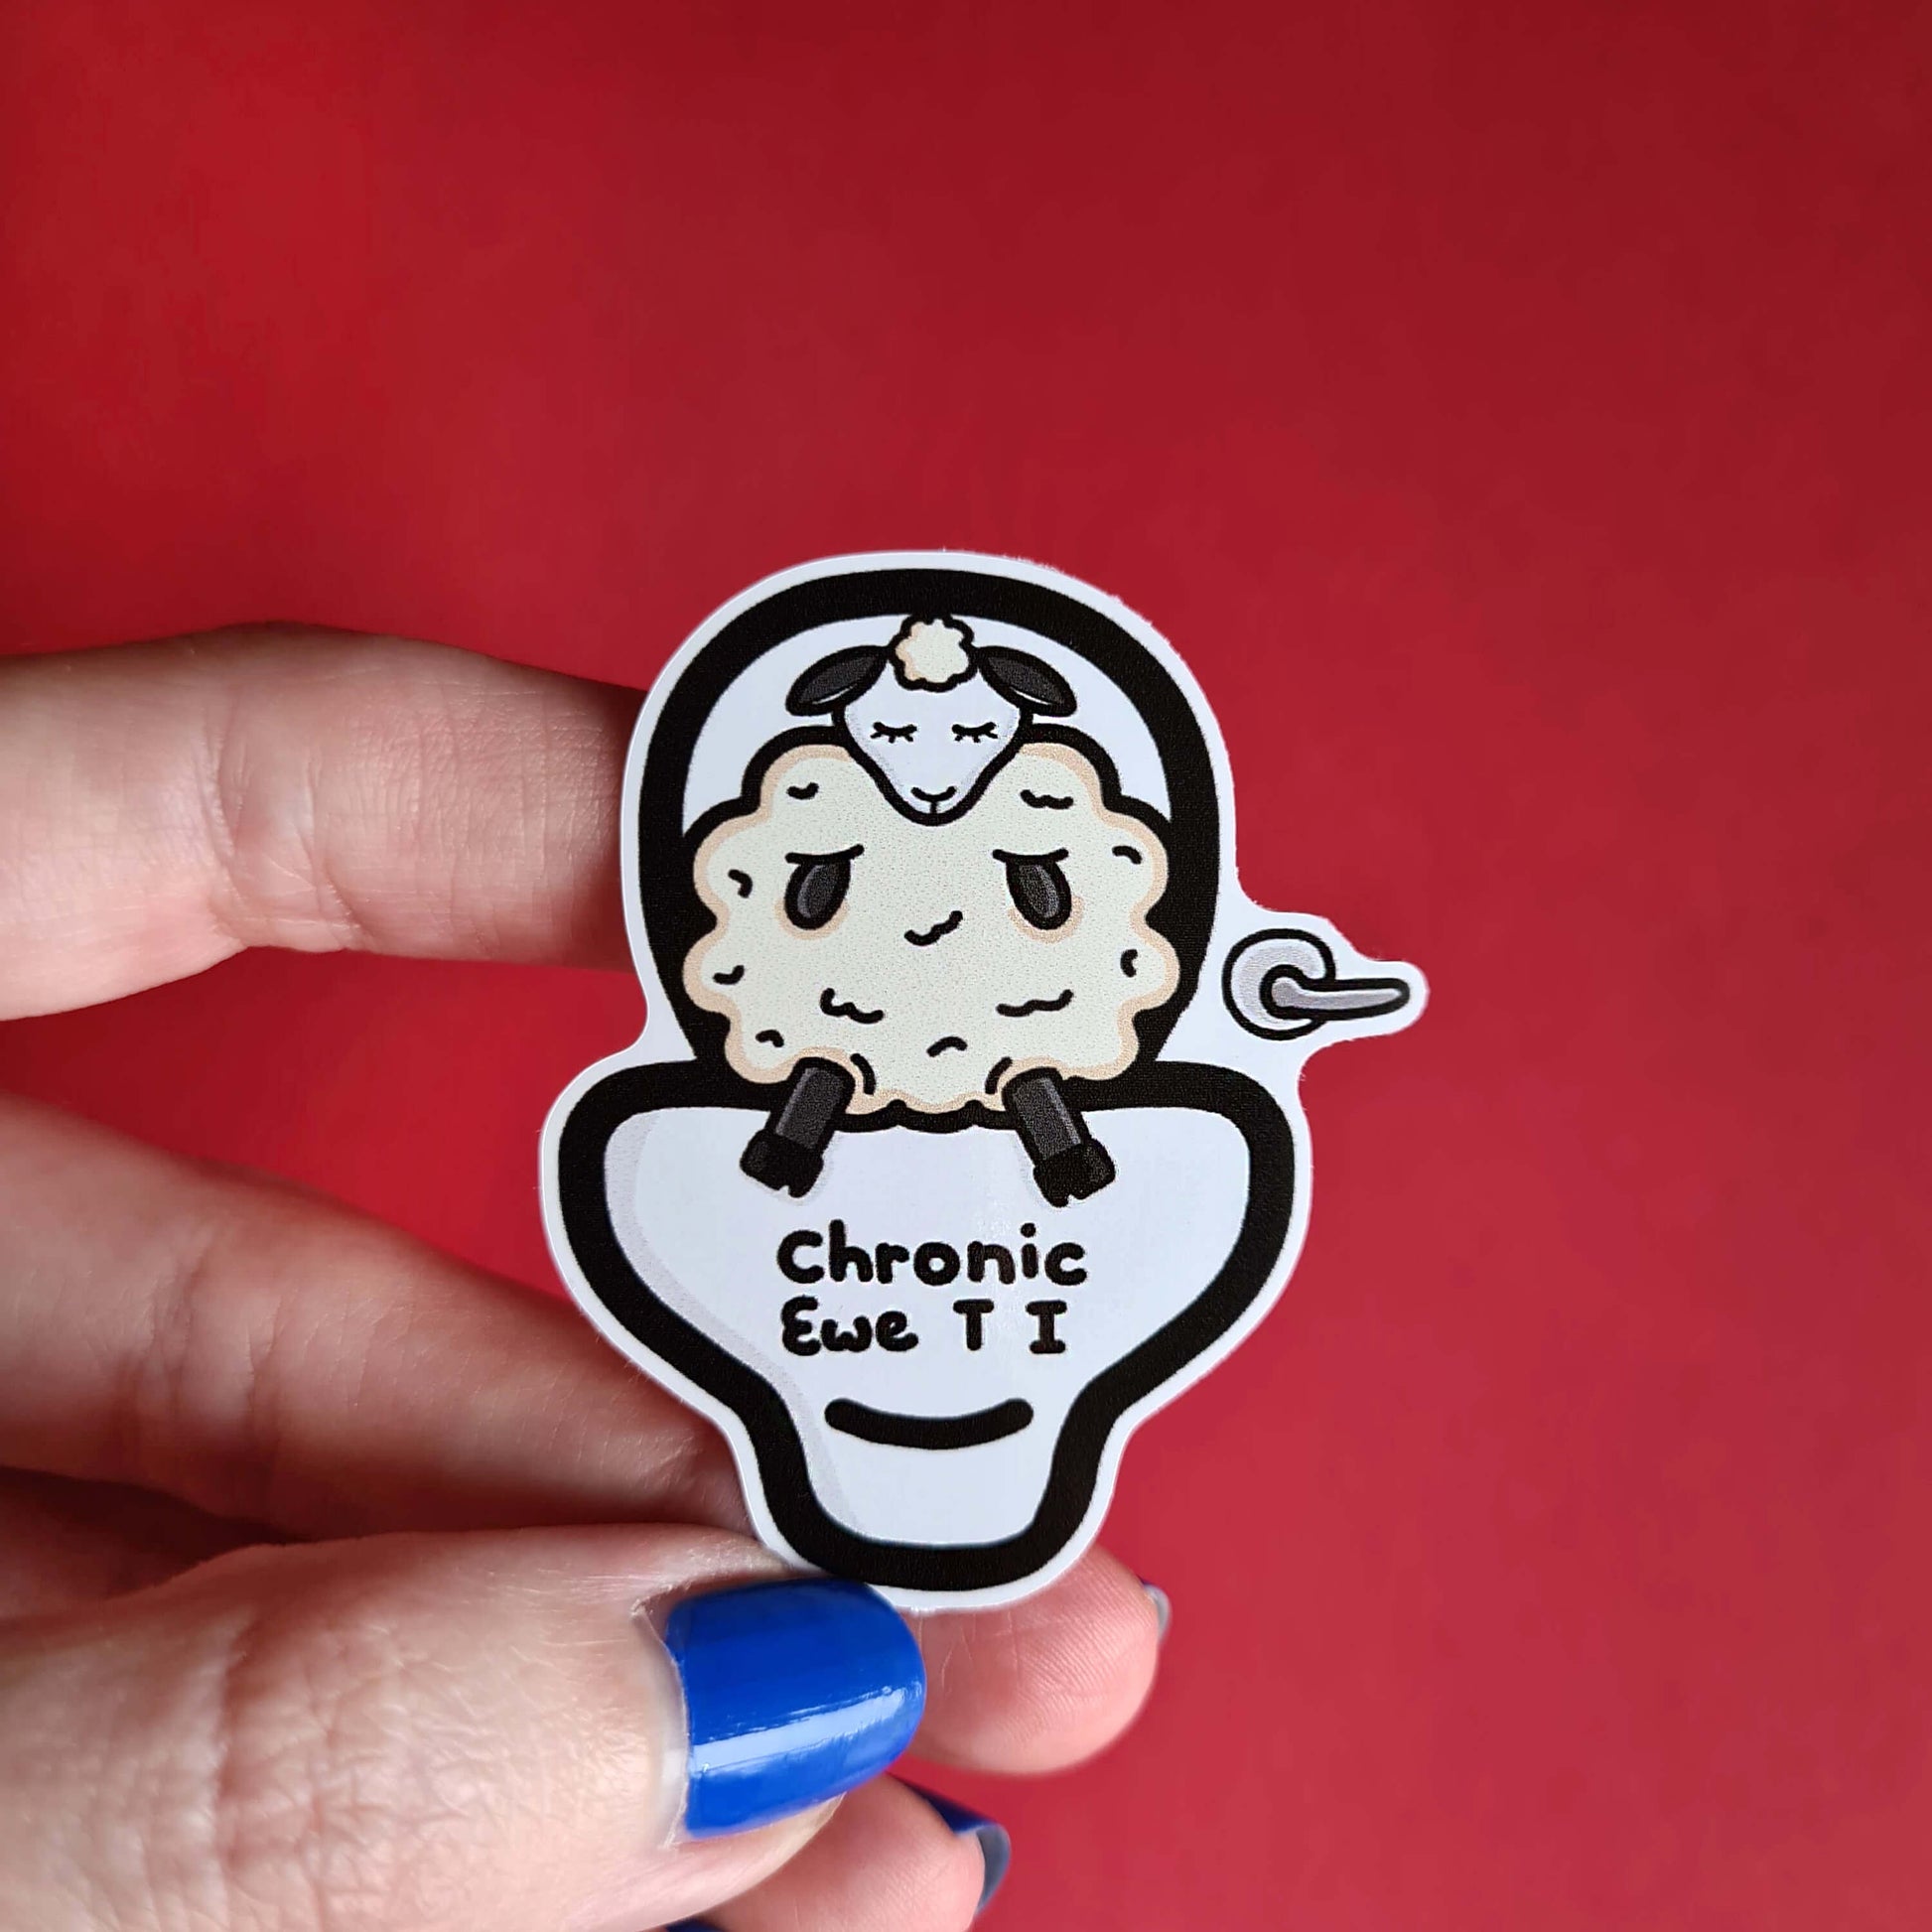 Chronic Ewe T I Sticker - Chronic UTI being held over a red background by a hand with blue nail varnish. The sticker features a white sad sheep sat on a large white toilet with black text reading chronic ewe T I. The design is raising awareness for chronic utis.